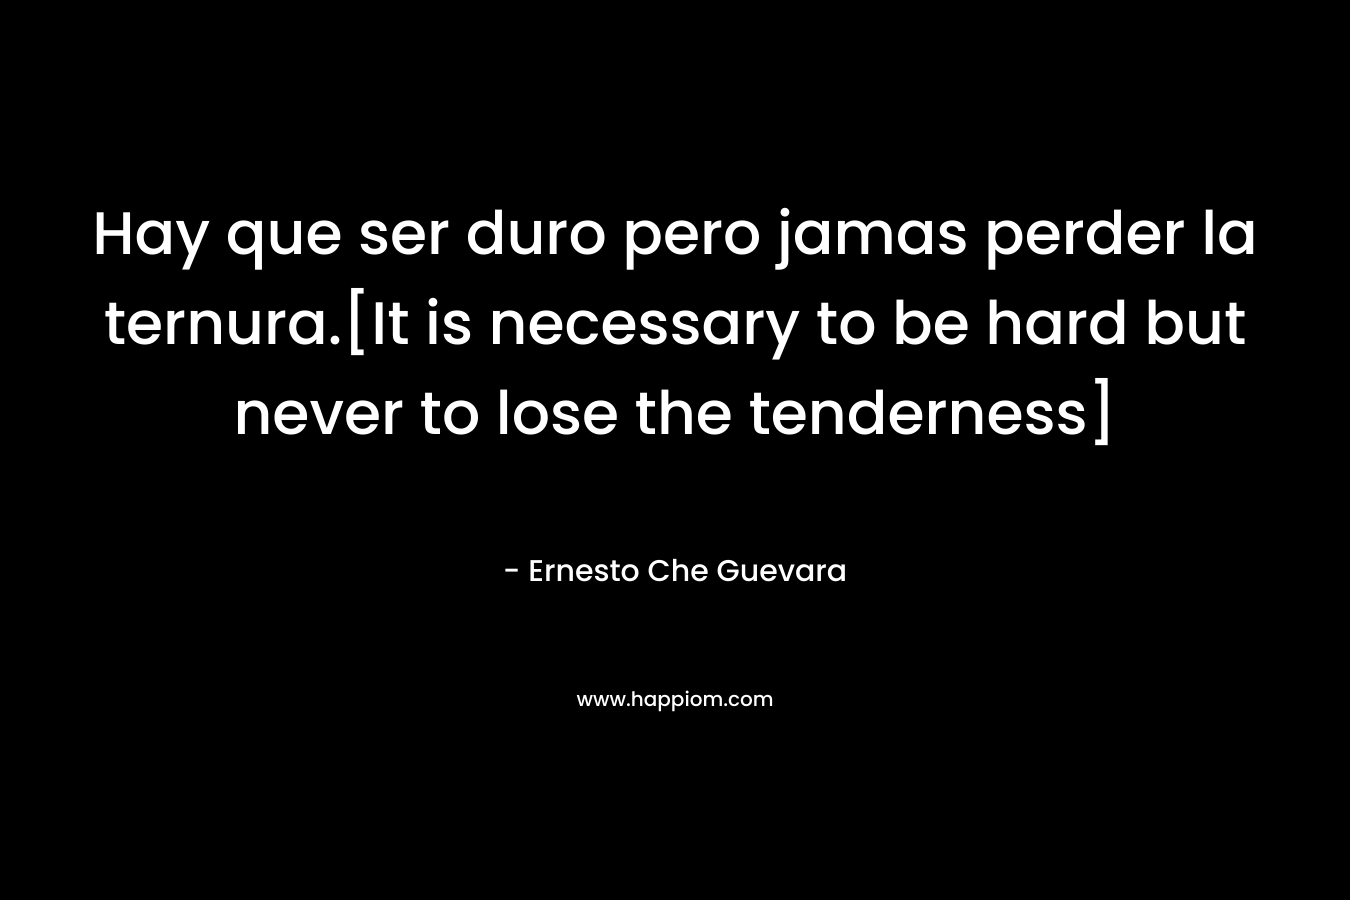 Hay que ser duro pero jamas perder la ternura.[It is necessary to be hard but never to lose the tenderness]